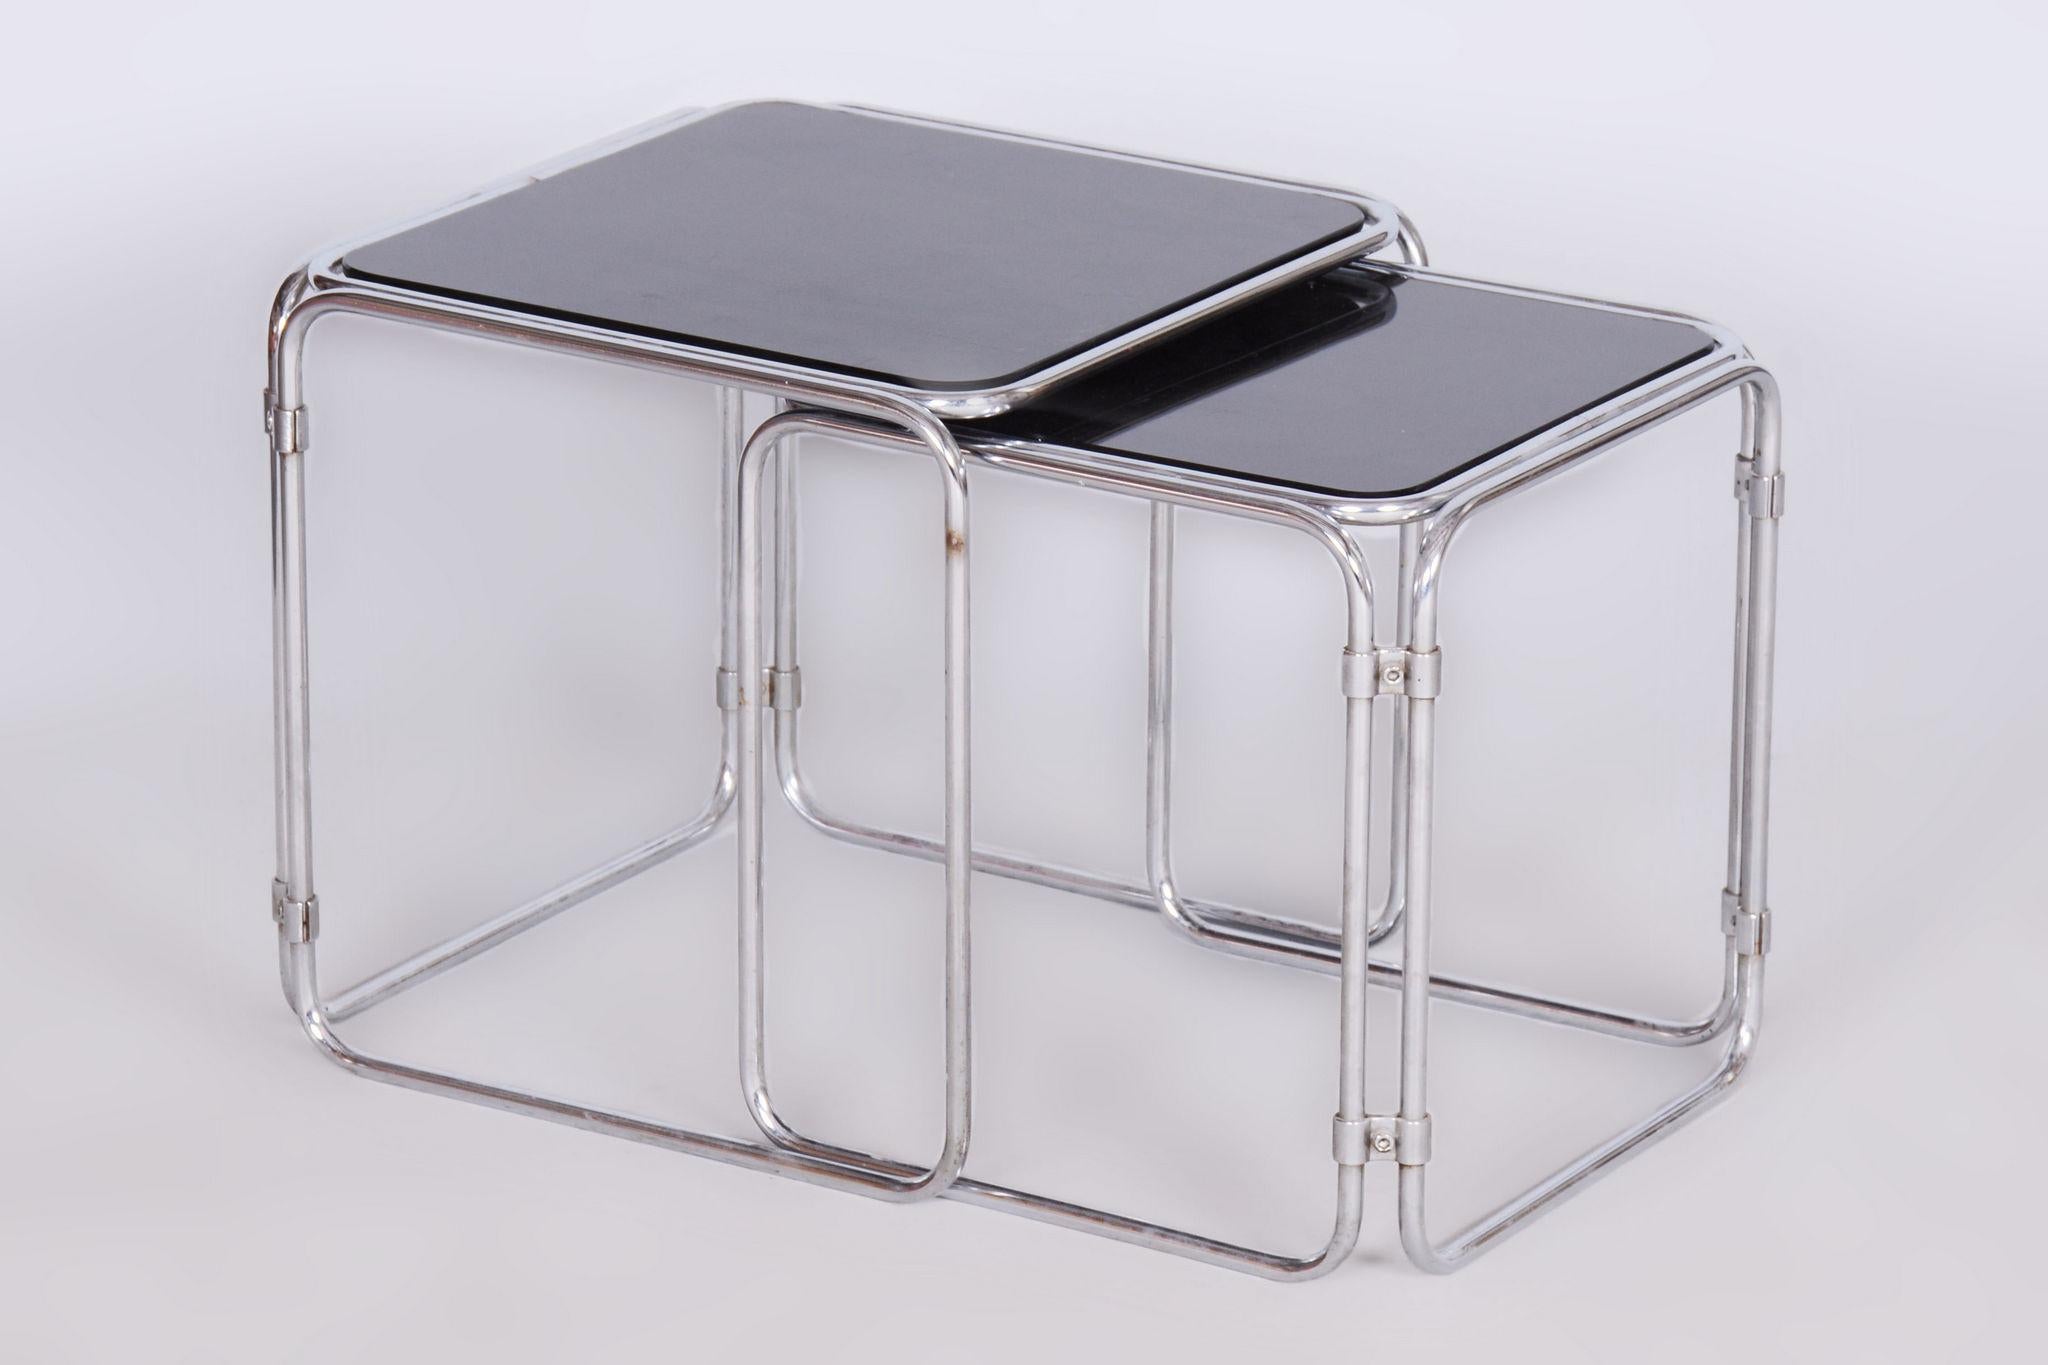 Restored Midcentury Nesting Tables, Chrome-Plated Steel, Glass, Czechia, 1960s For Sale 4